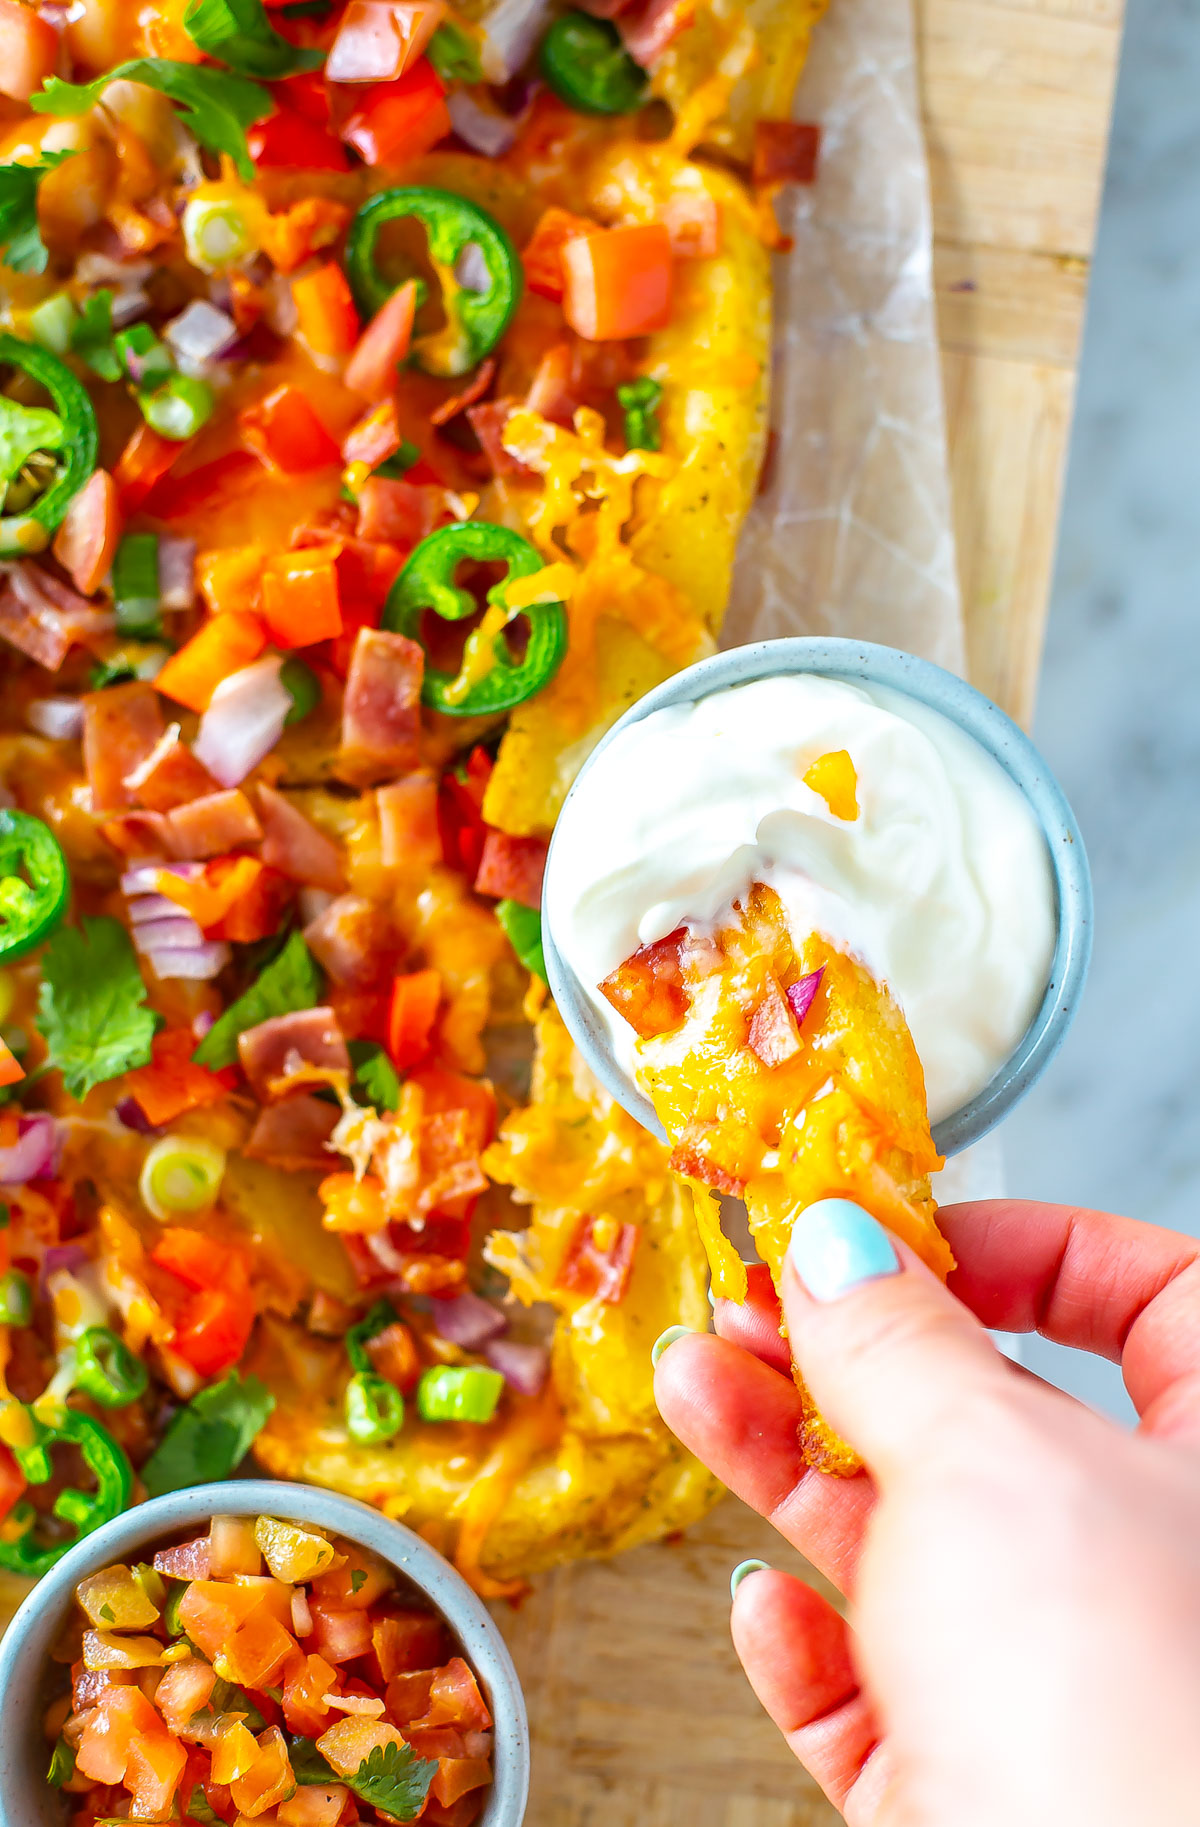 A close-up of someone picking up an Irish nacho and dipping it into sour cream.